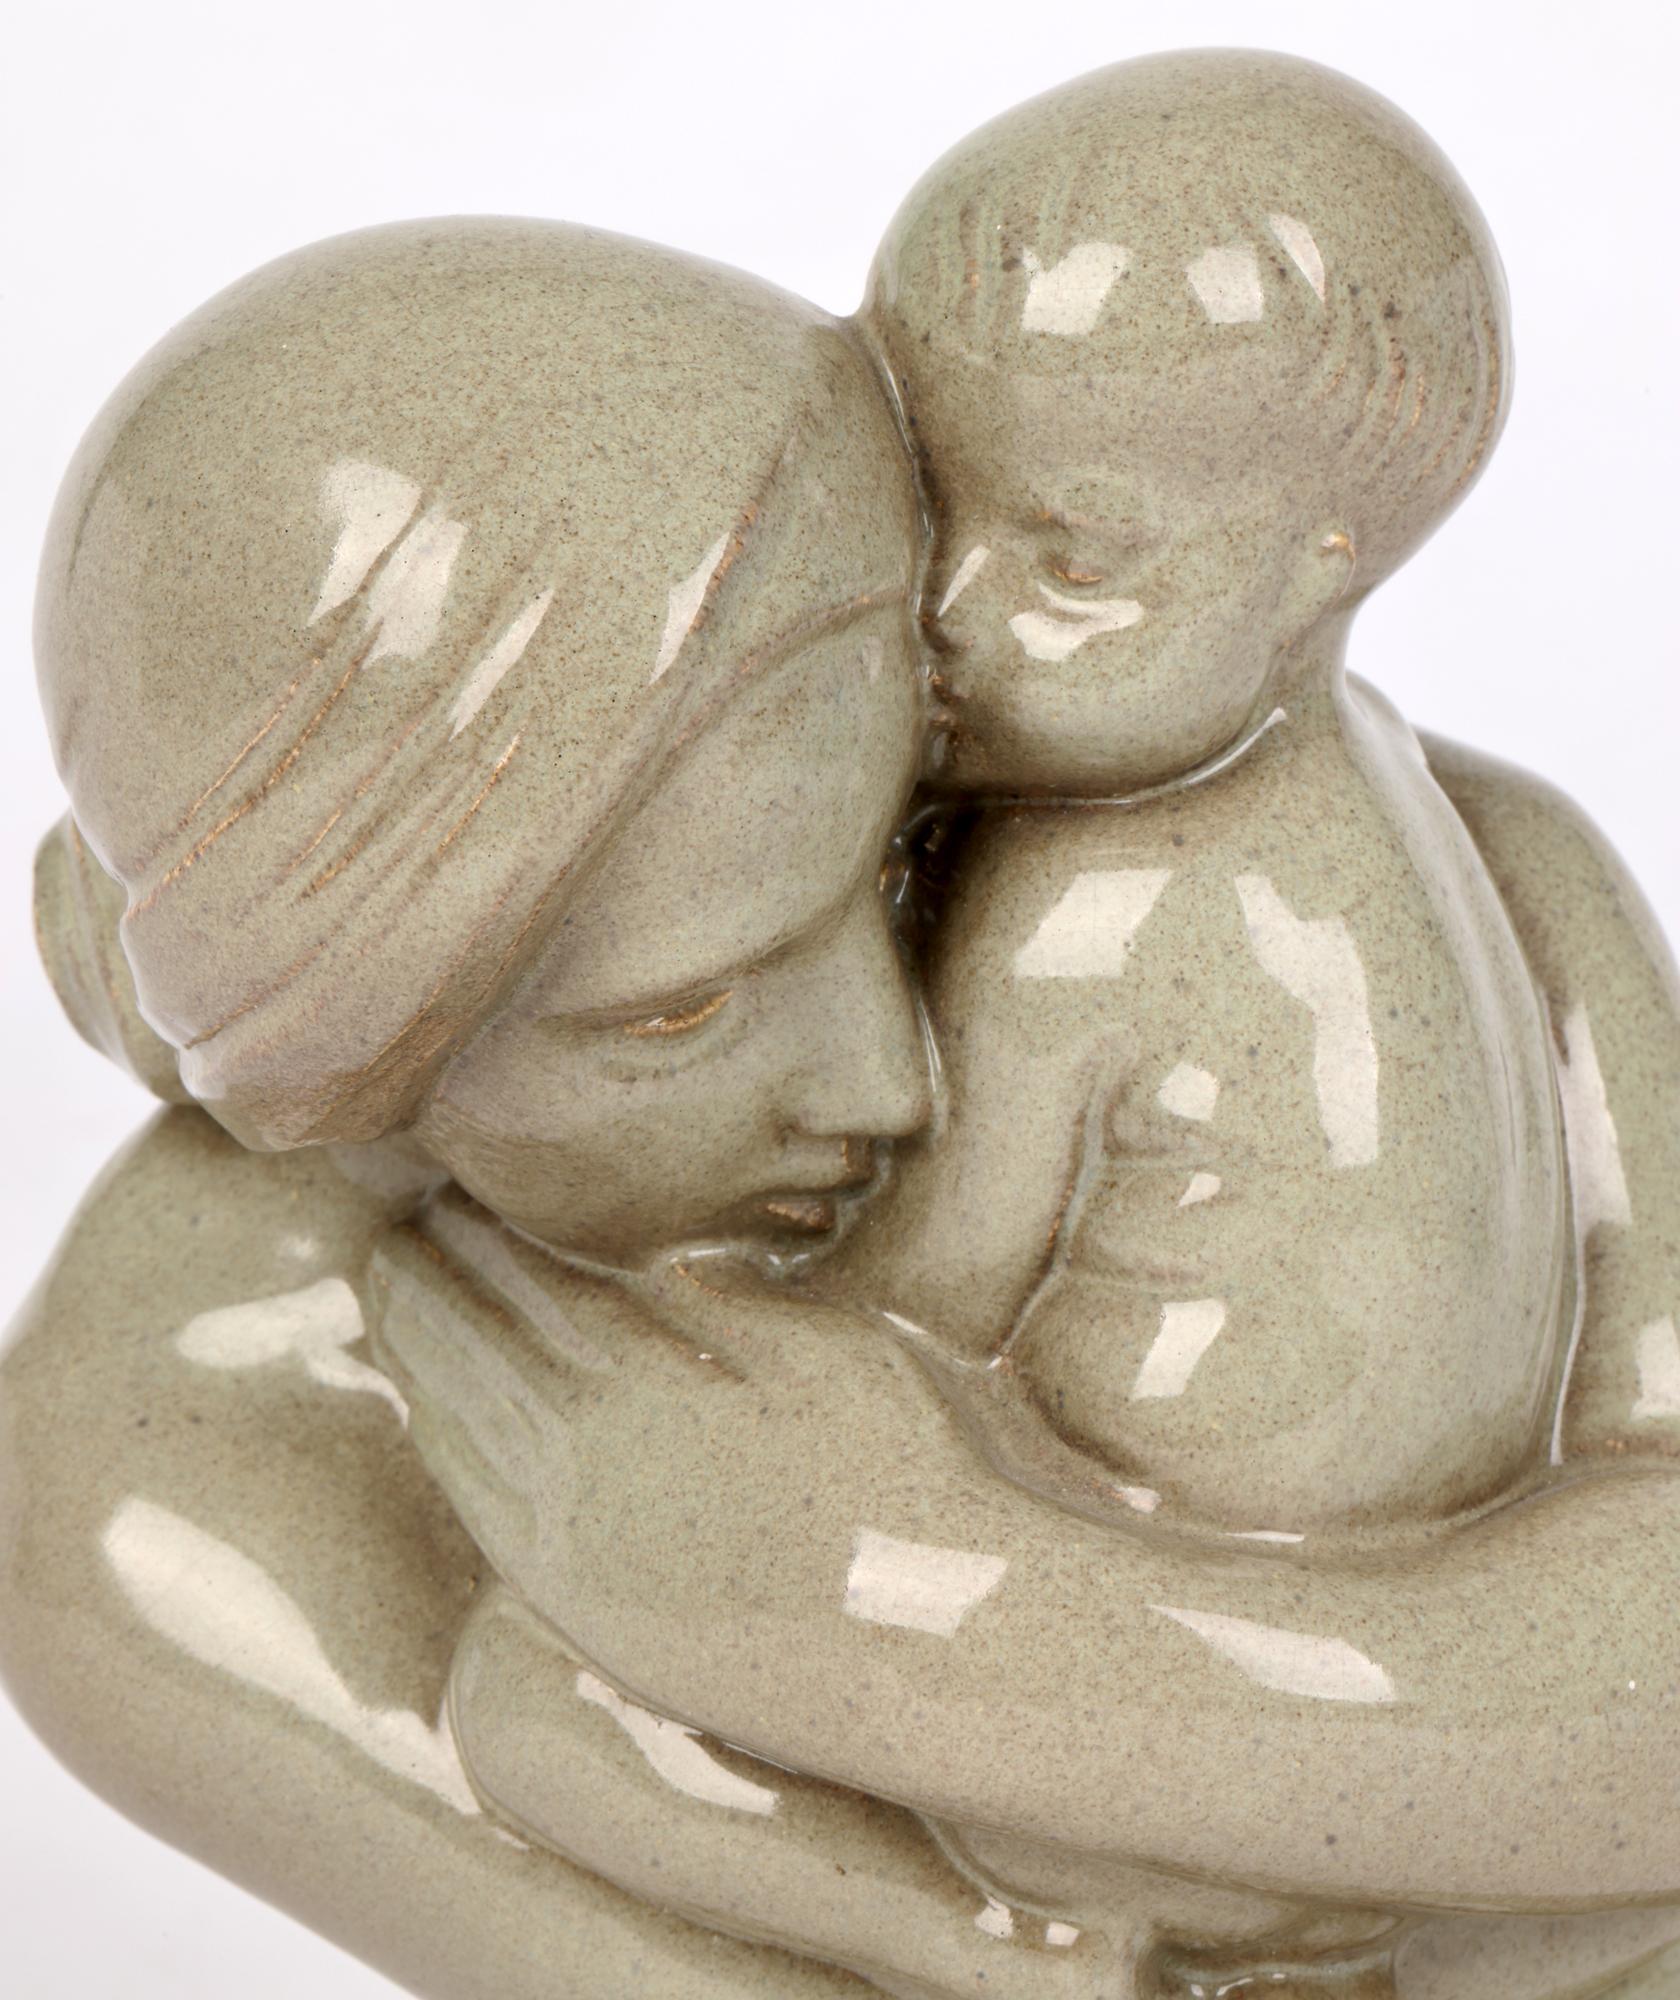 A beautiful Art Deco pottery sculpture of a mother and child by Christine Gregory (British, 1879-1965) dated 1933. This very tender and well observed portrayal shows the mother holding the child wrapped in her arms and held cheek to cheek her